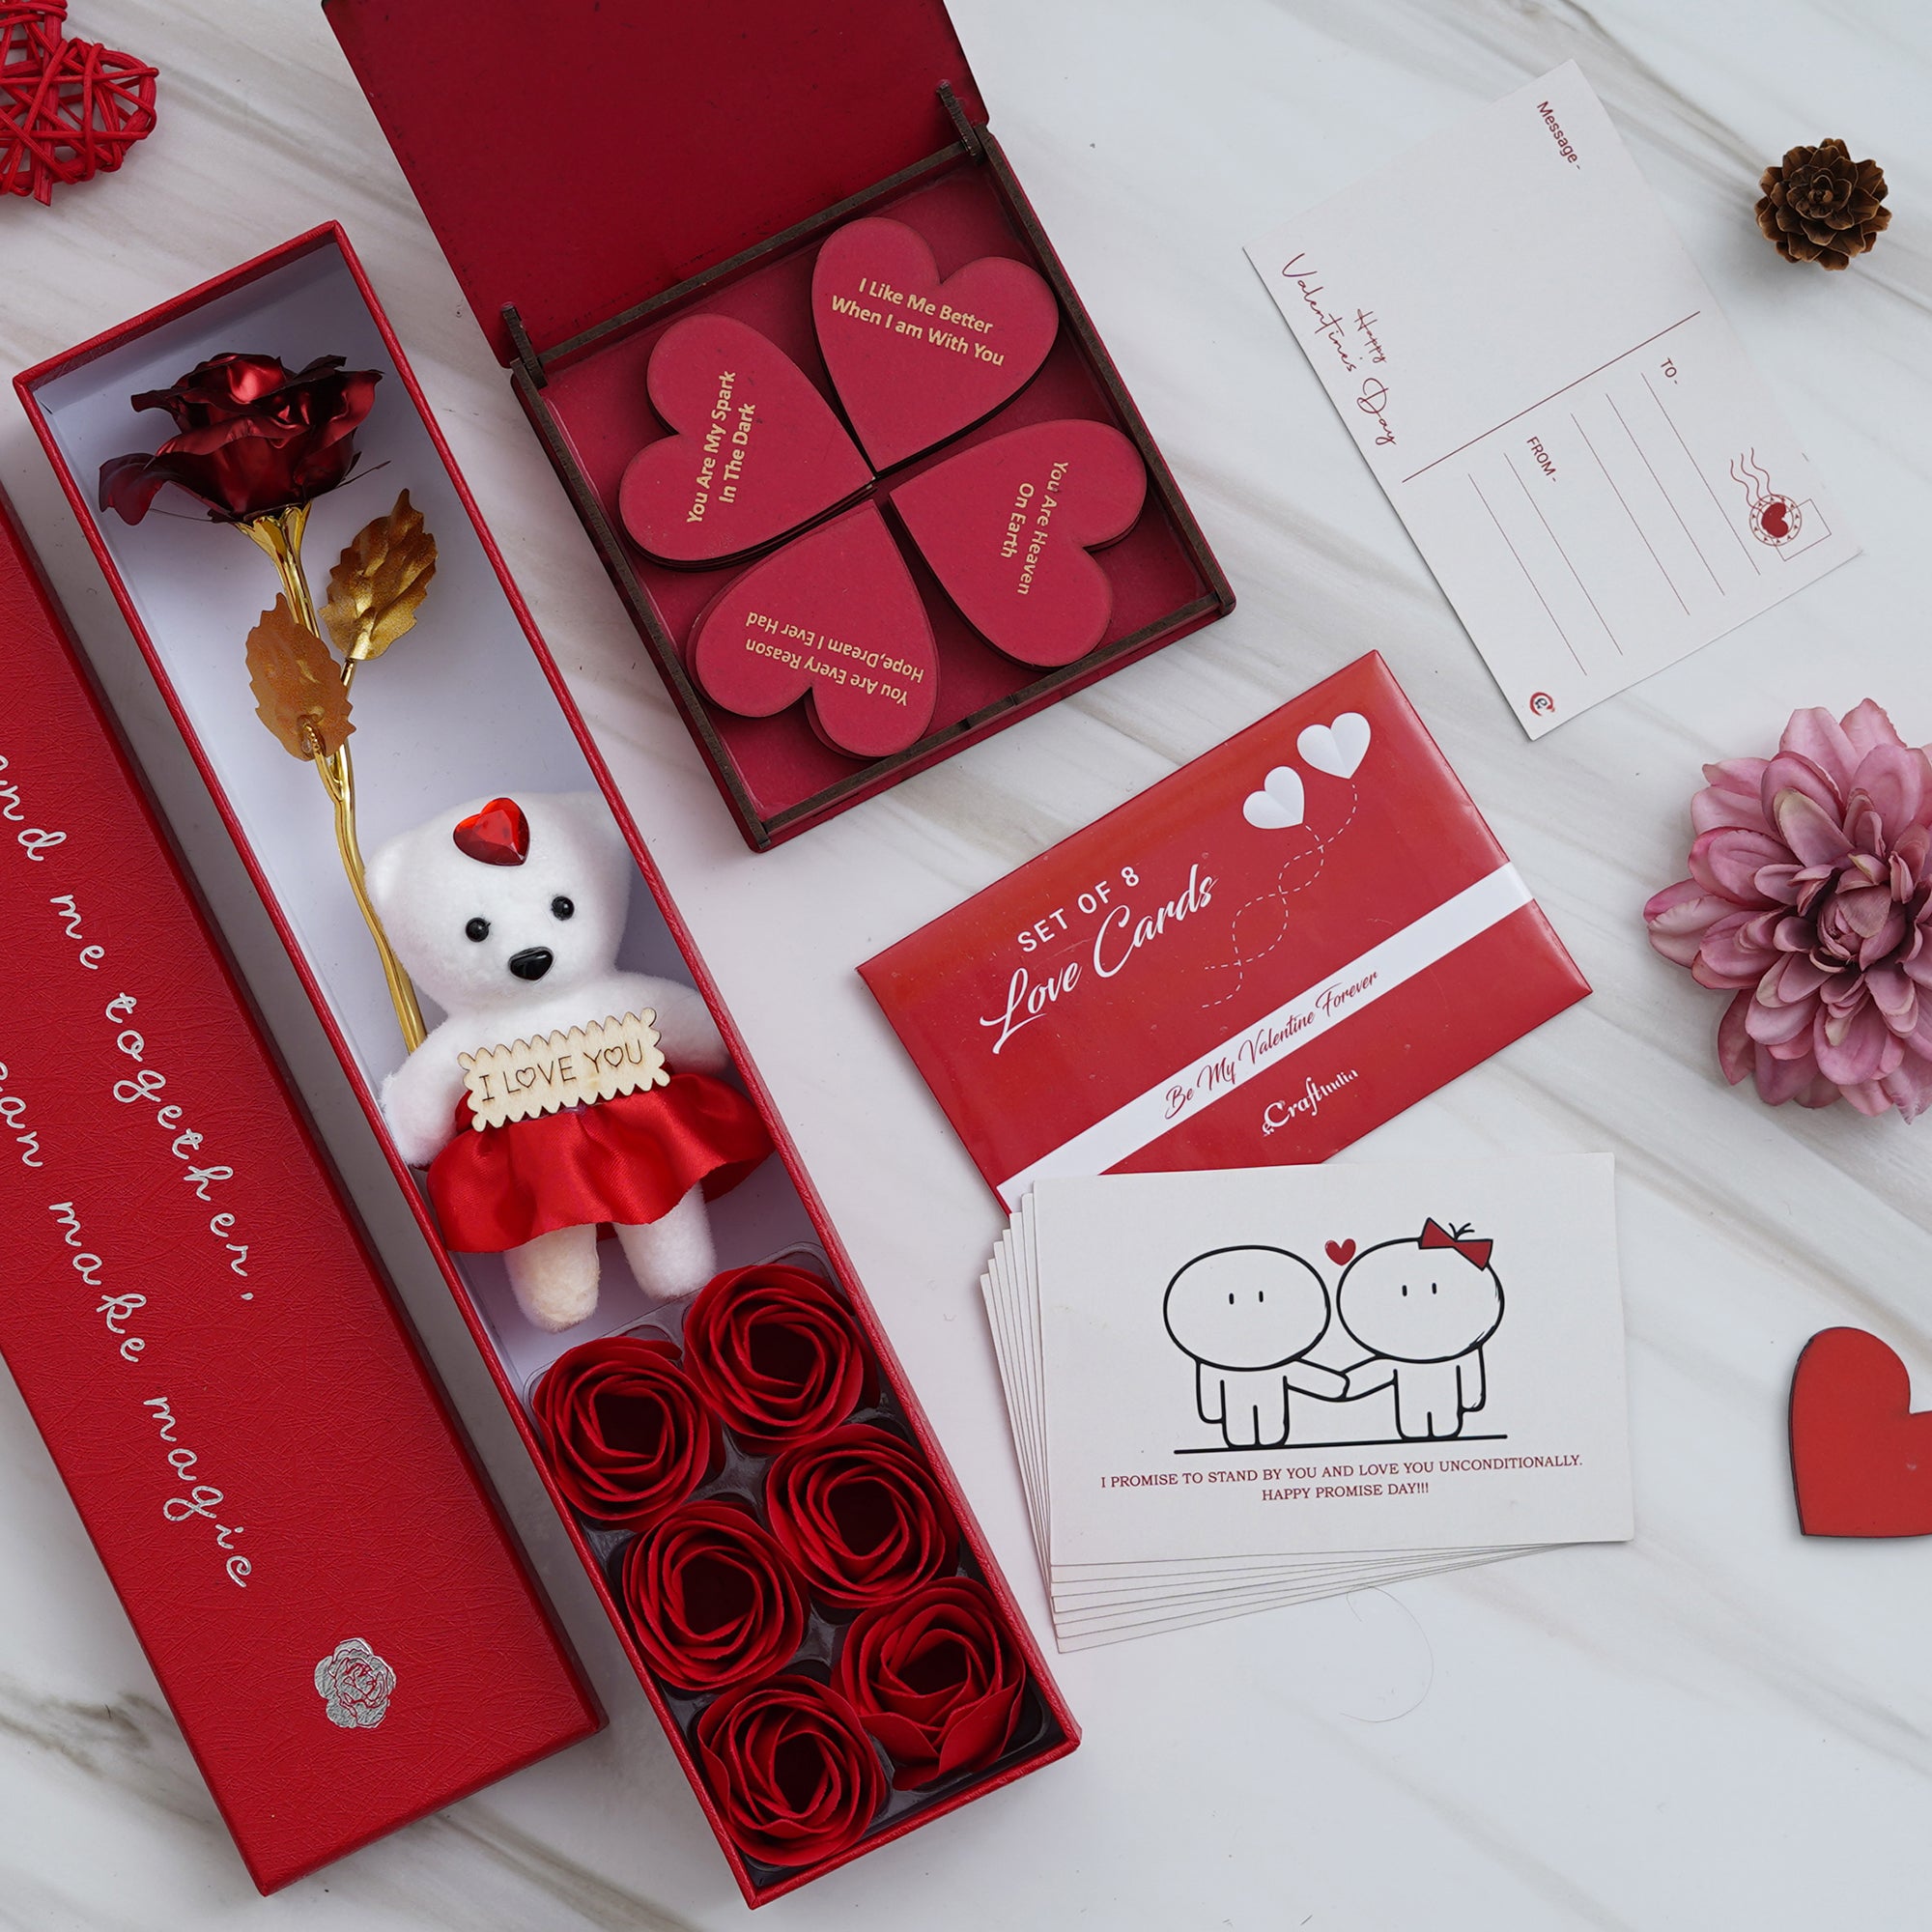 Valentine Combo of Set of 8 Love Post Cards Gift Cards Set, Red Gift Box with Teddy & Roses, "20 Reasons Why I Love You" Printed on Little Red Hearts Decorative Wooden Gift Set Box